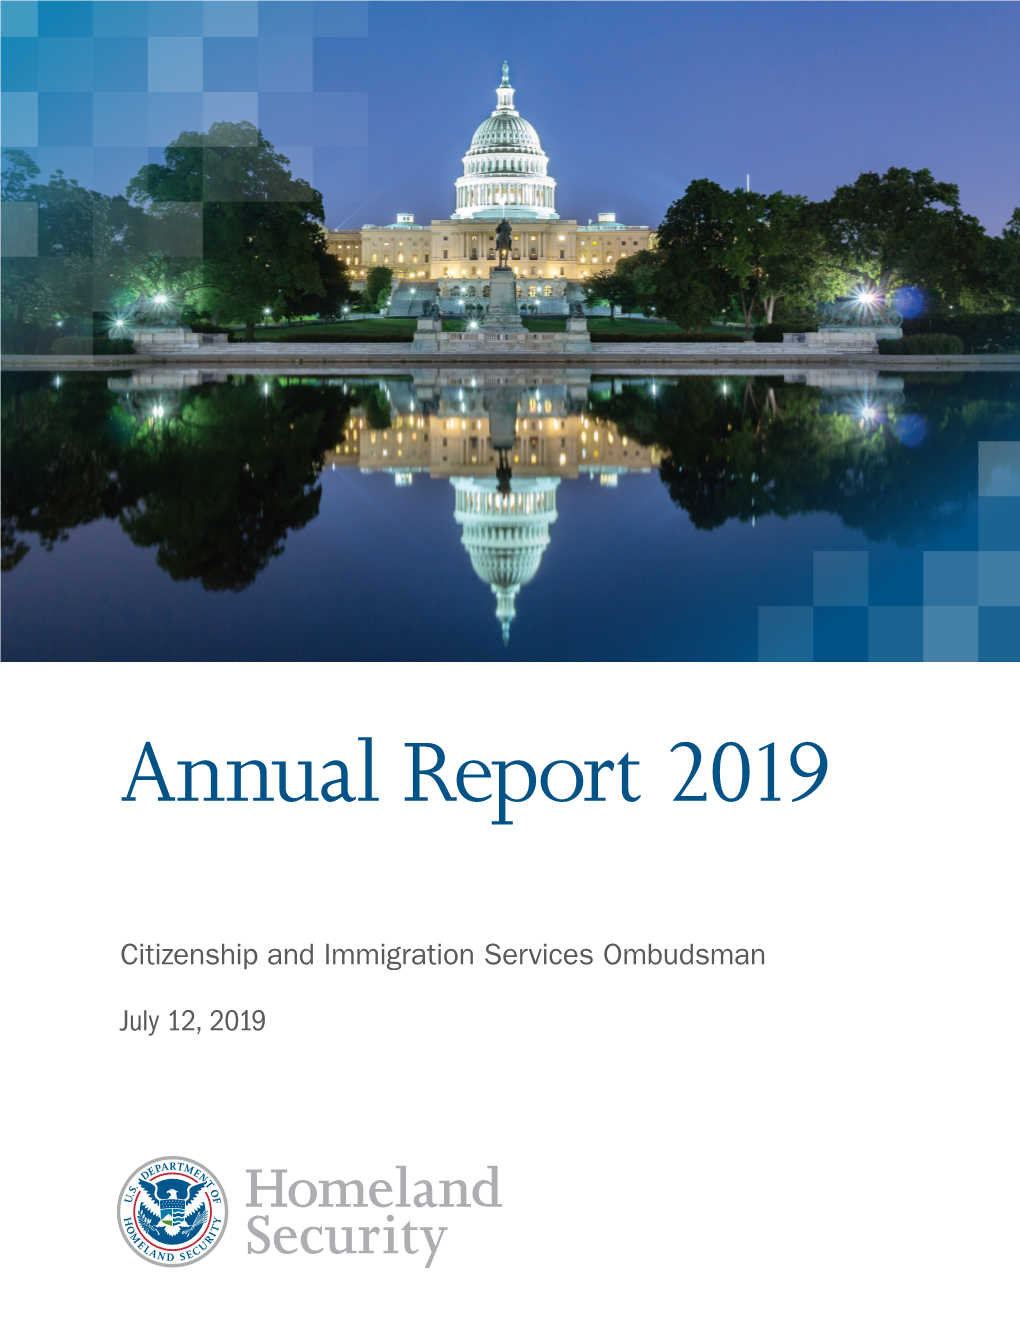 Citizenship and Immigration Services Ombudsman Annual Report 2019